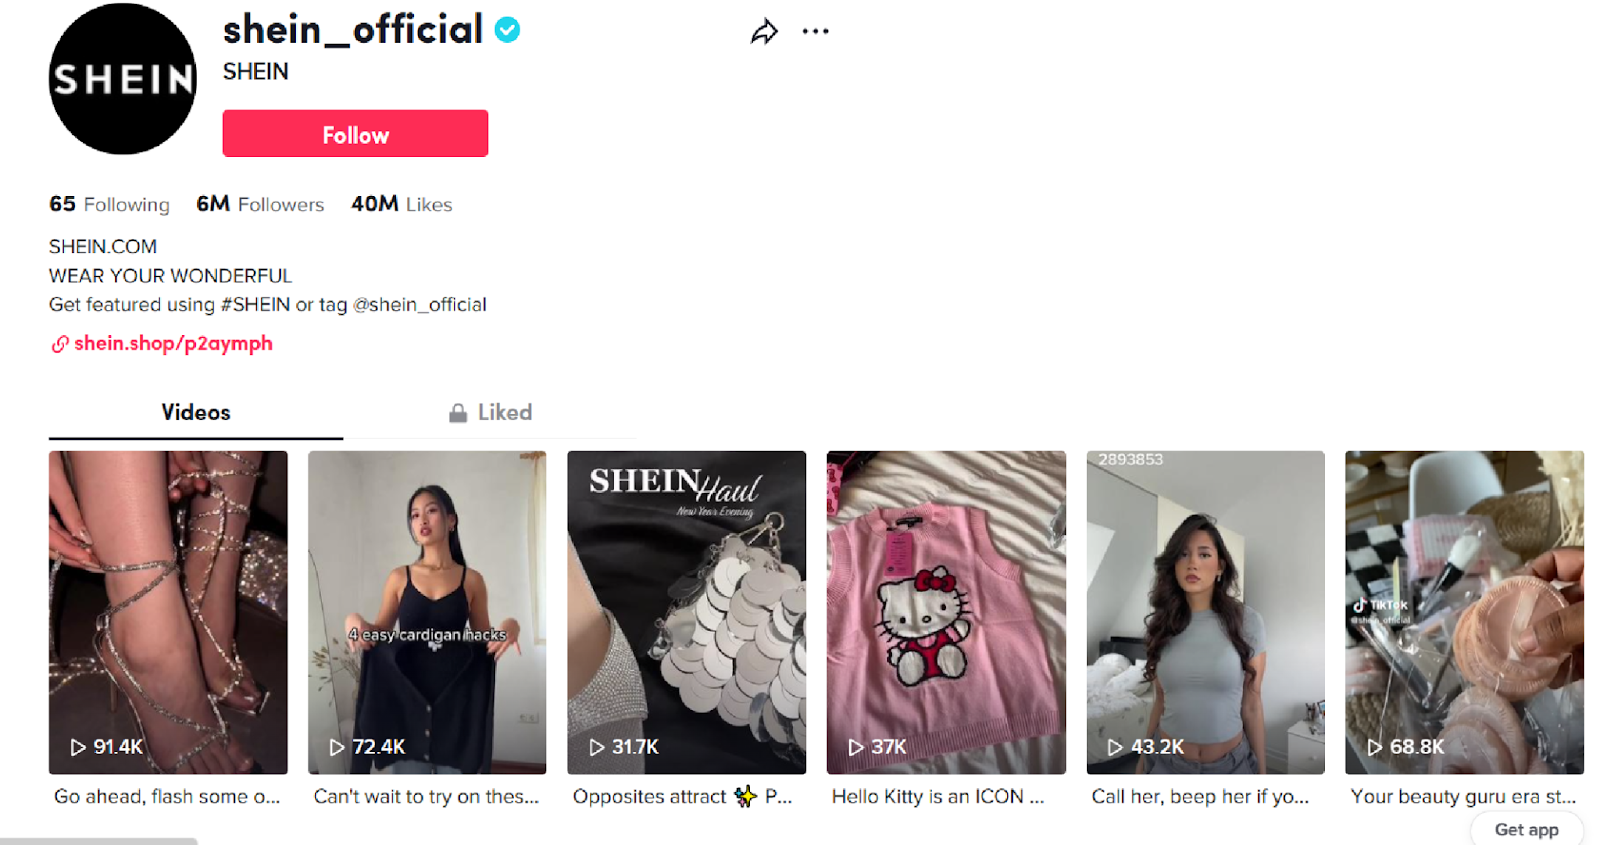 The fantastic TikTok page of SHEIN filled with user-generated videos. This is a fantastic example of good content marketing.